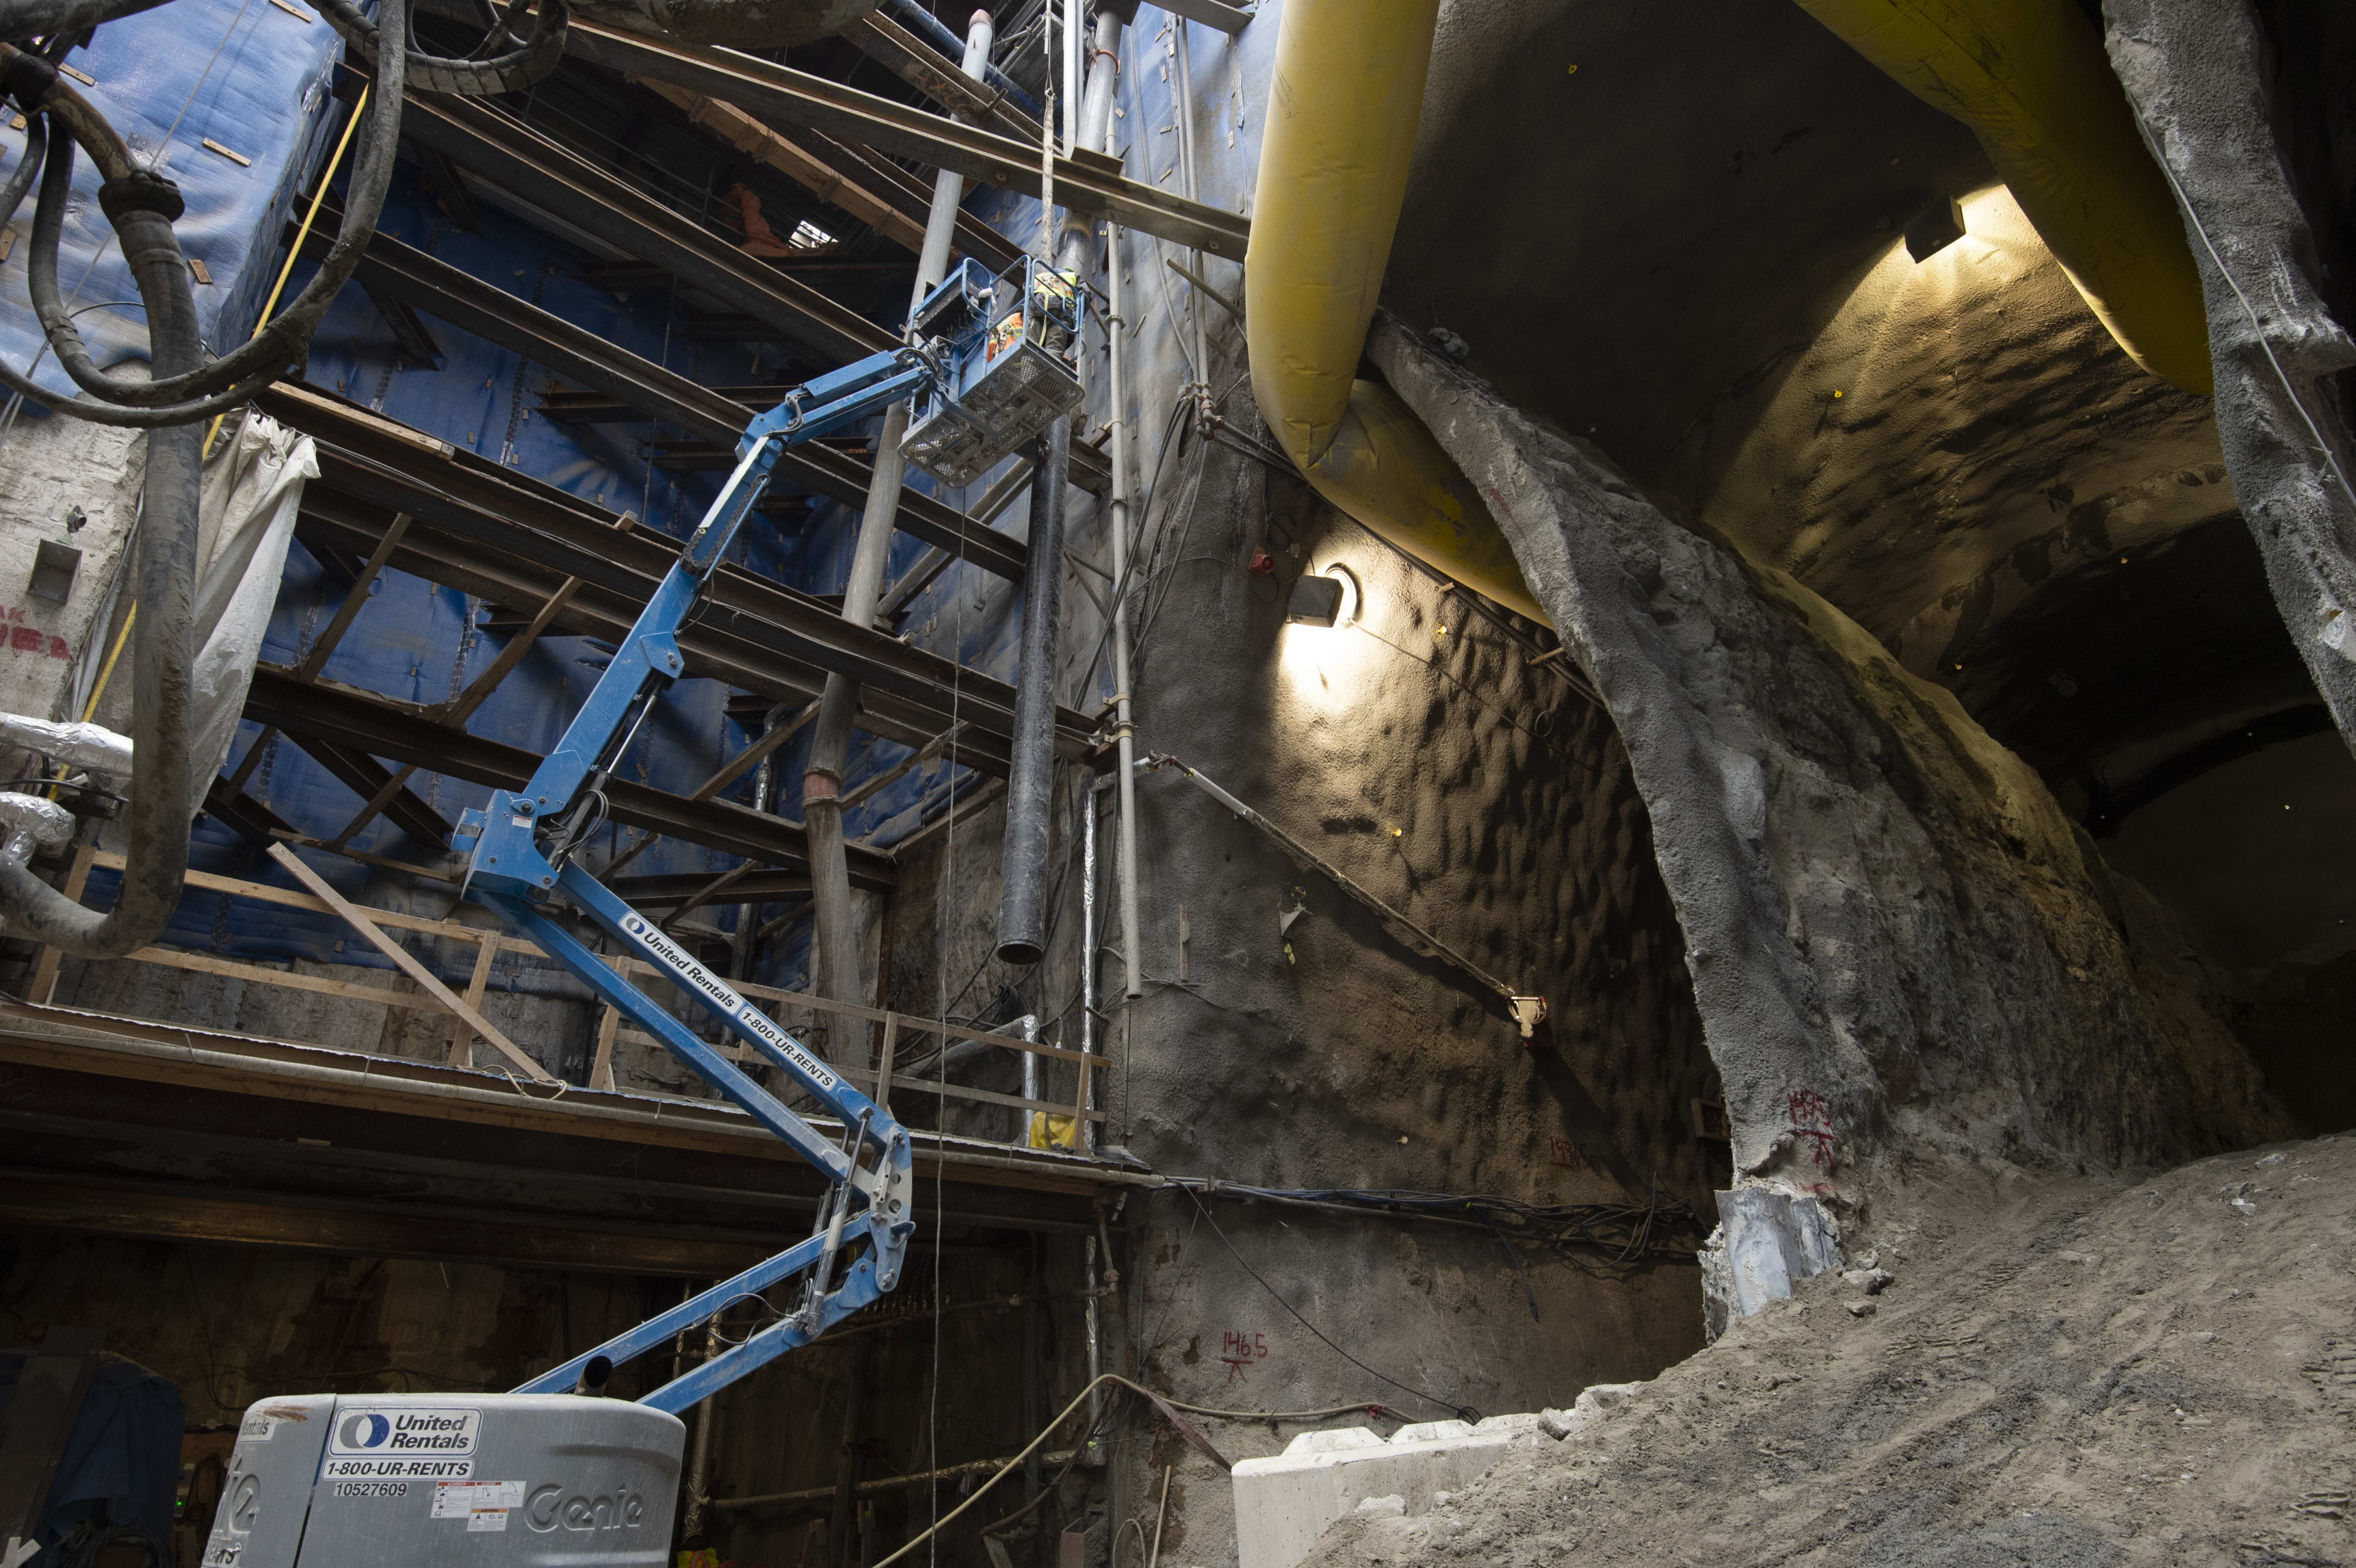 A crane works inside a massive cavern that's been dug out below an active part of the city. Shown...